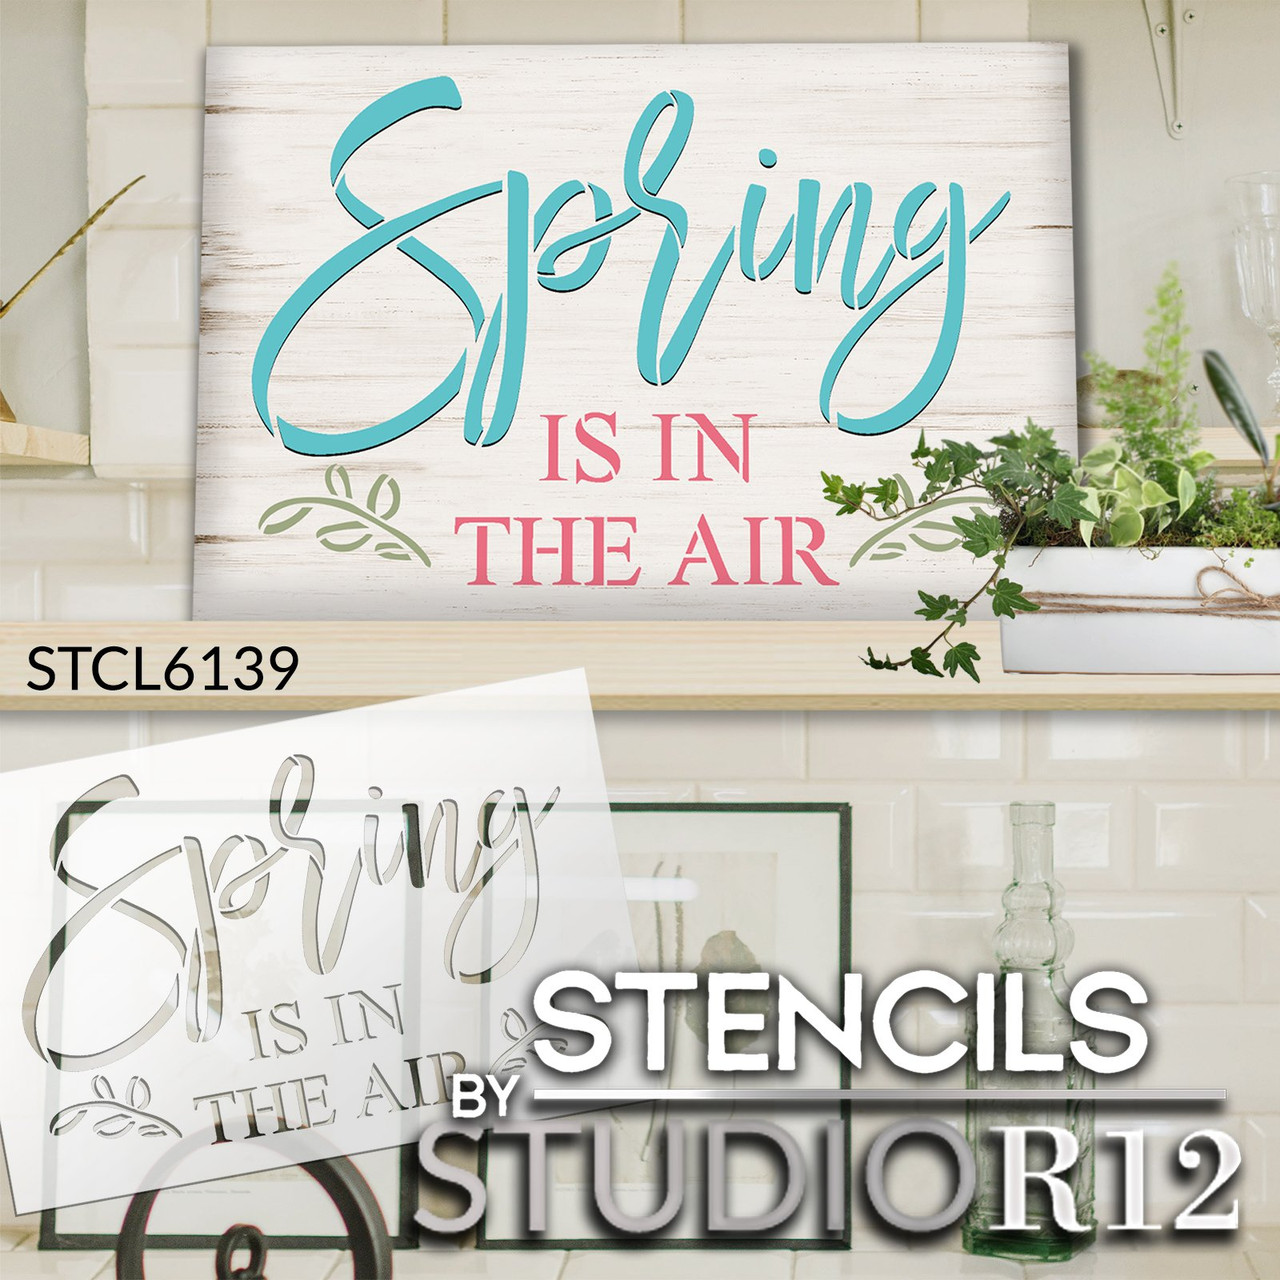 Spring is in The Air Stencil by StudioR12 | Craft DIY Spring Home Decor | Paint Seasonal Wood Sign | Reusable Mylar Template | Select Size